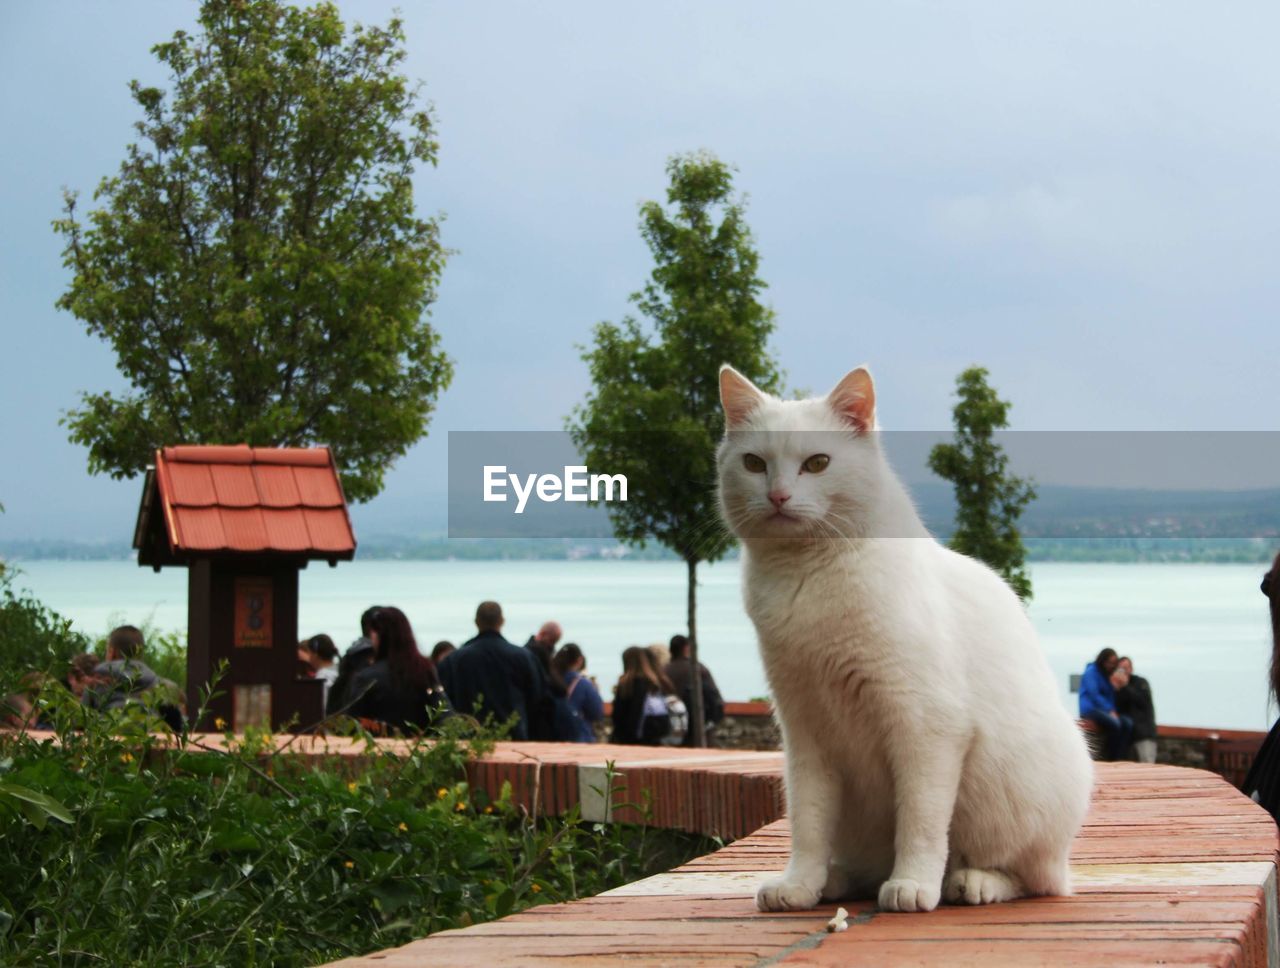 VIEW OF A CAT SITTING BY THE LAKE